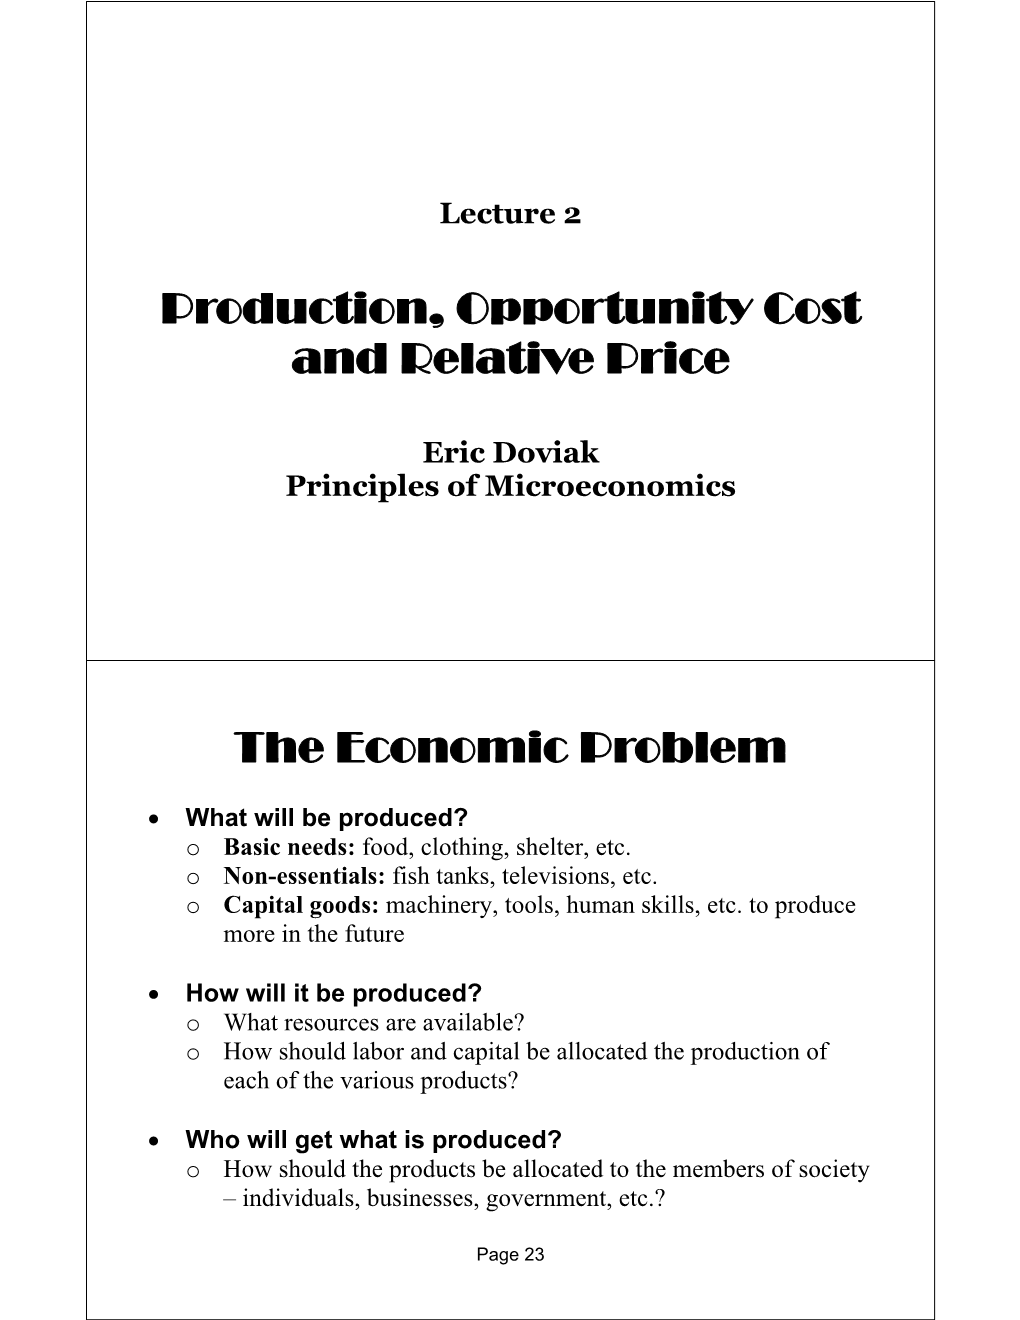 Production, Opportunity Cost and Relative Price the Economic Problem